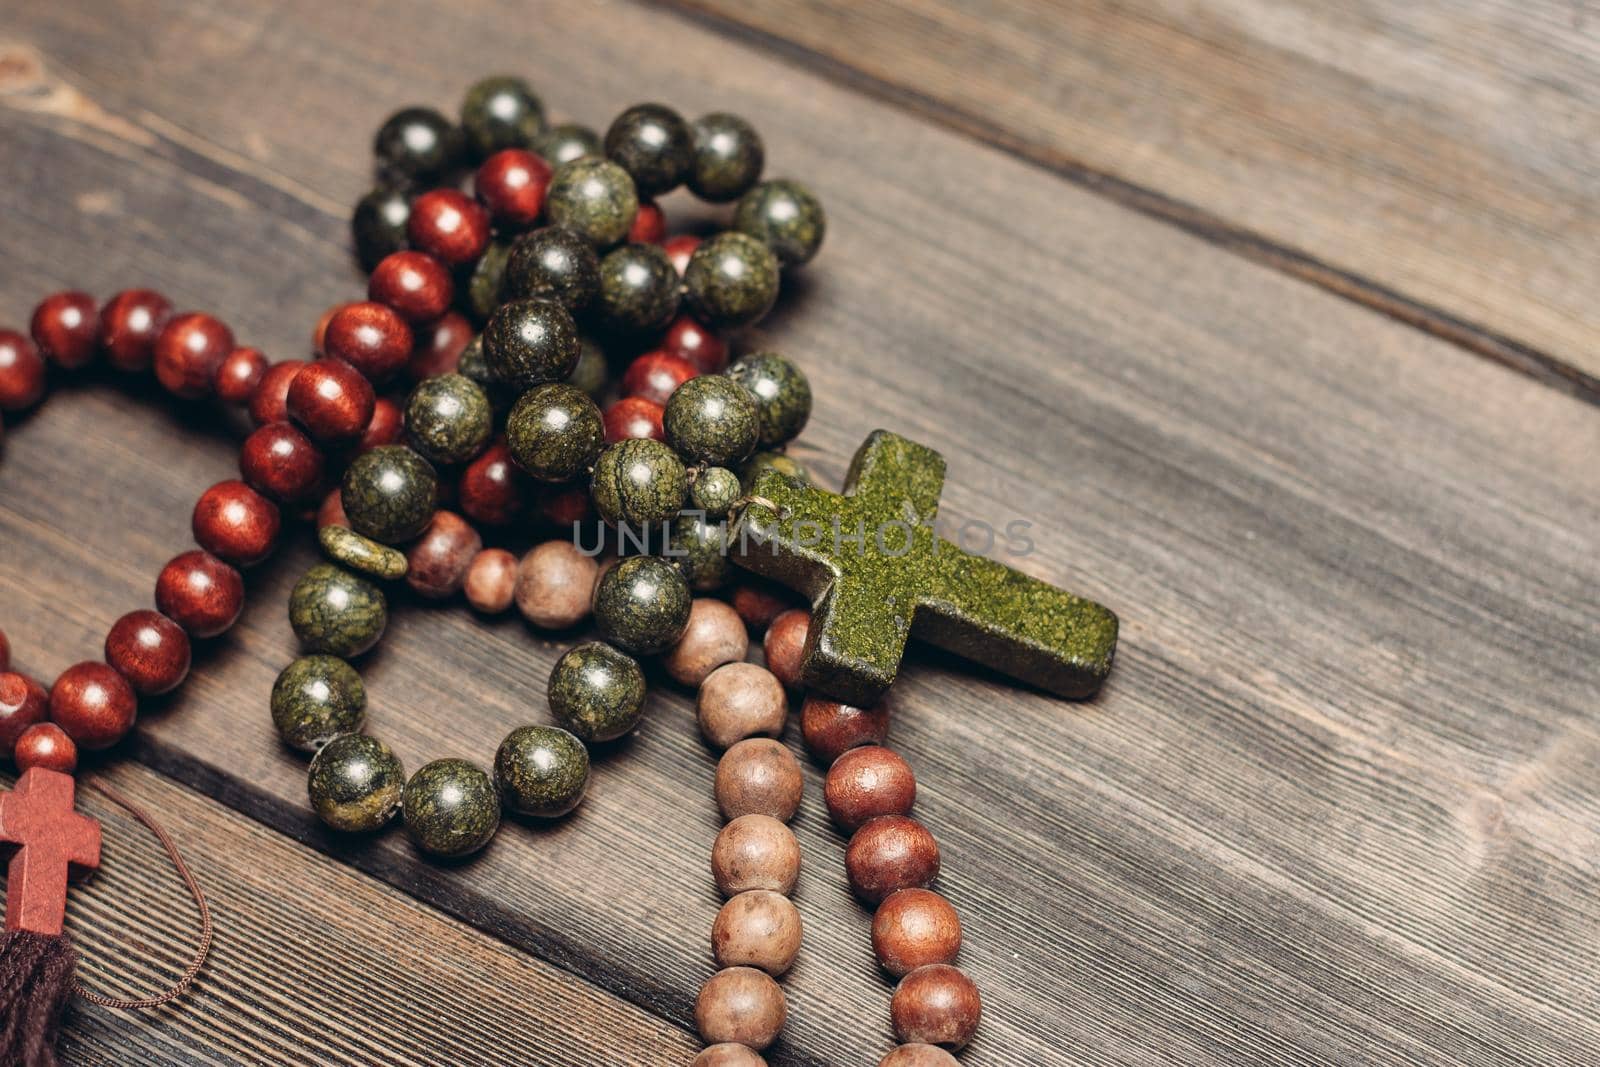 Orthodox cross with beads clear religion catholicism. High quality photo